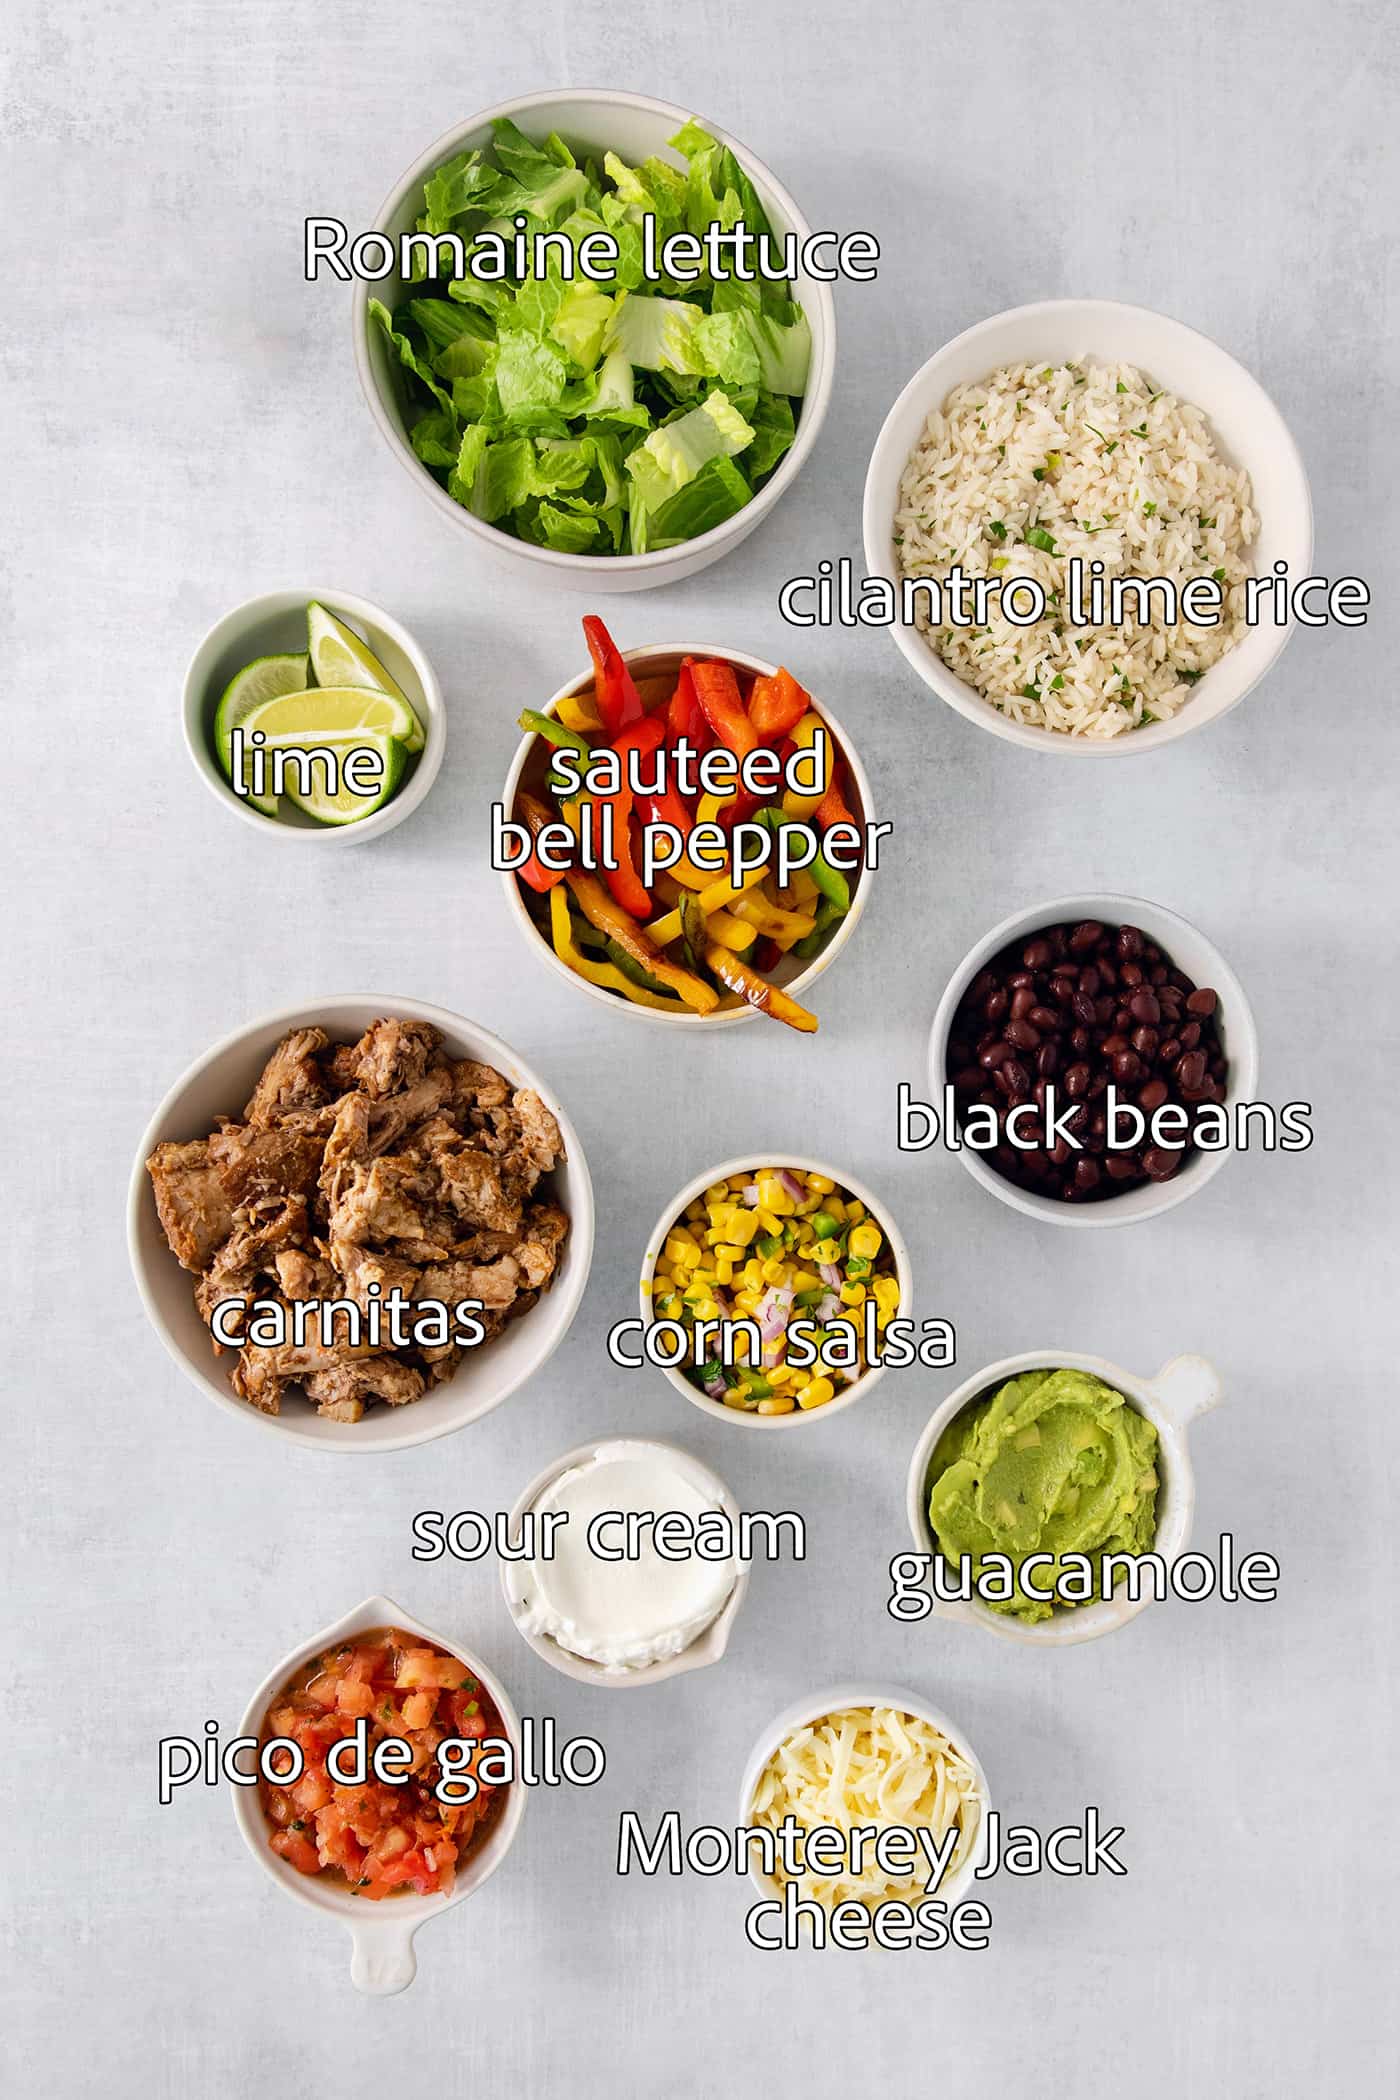 The ingredients for carnitas burrito bowls are shown portioned out and labeled: carnitas, sweet red peppers, black beans, corn salsa, guacamole, pico de gallo, lime, cilantro rice, lettuce, jack cheese, sour cream.